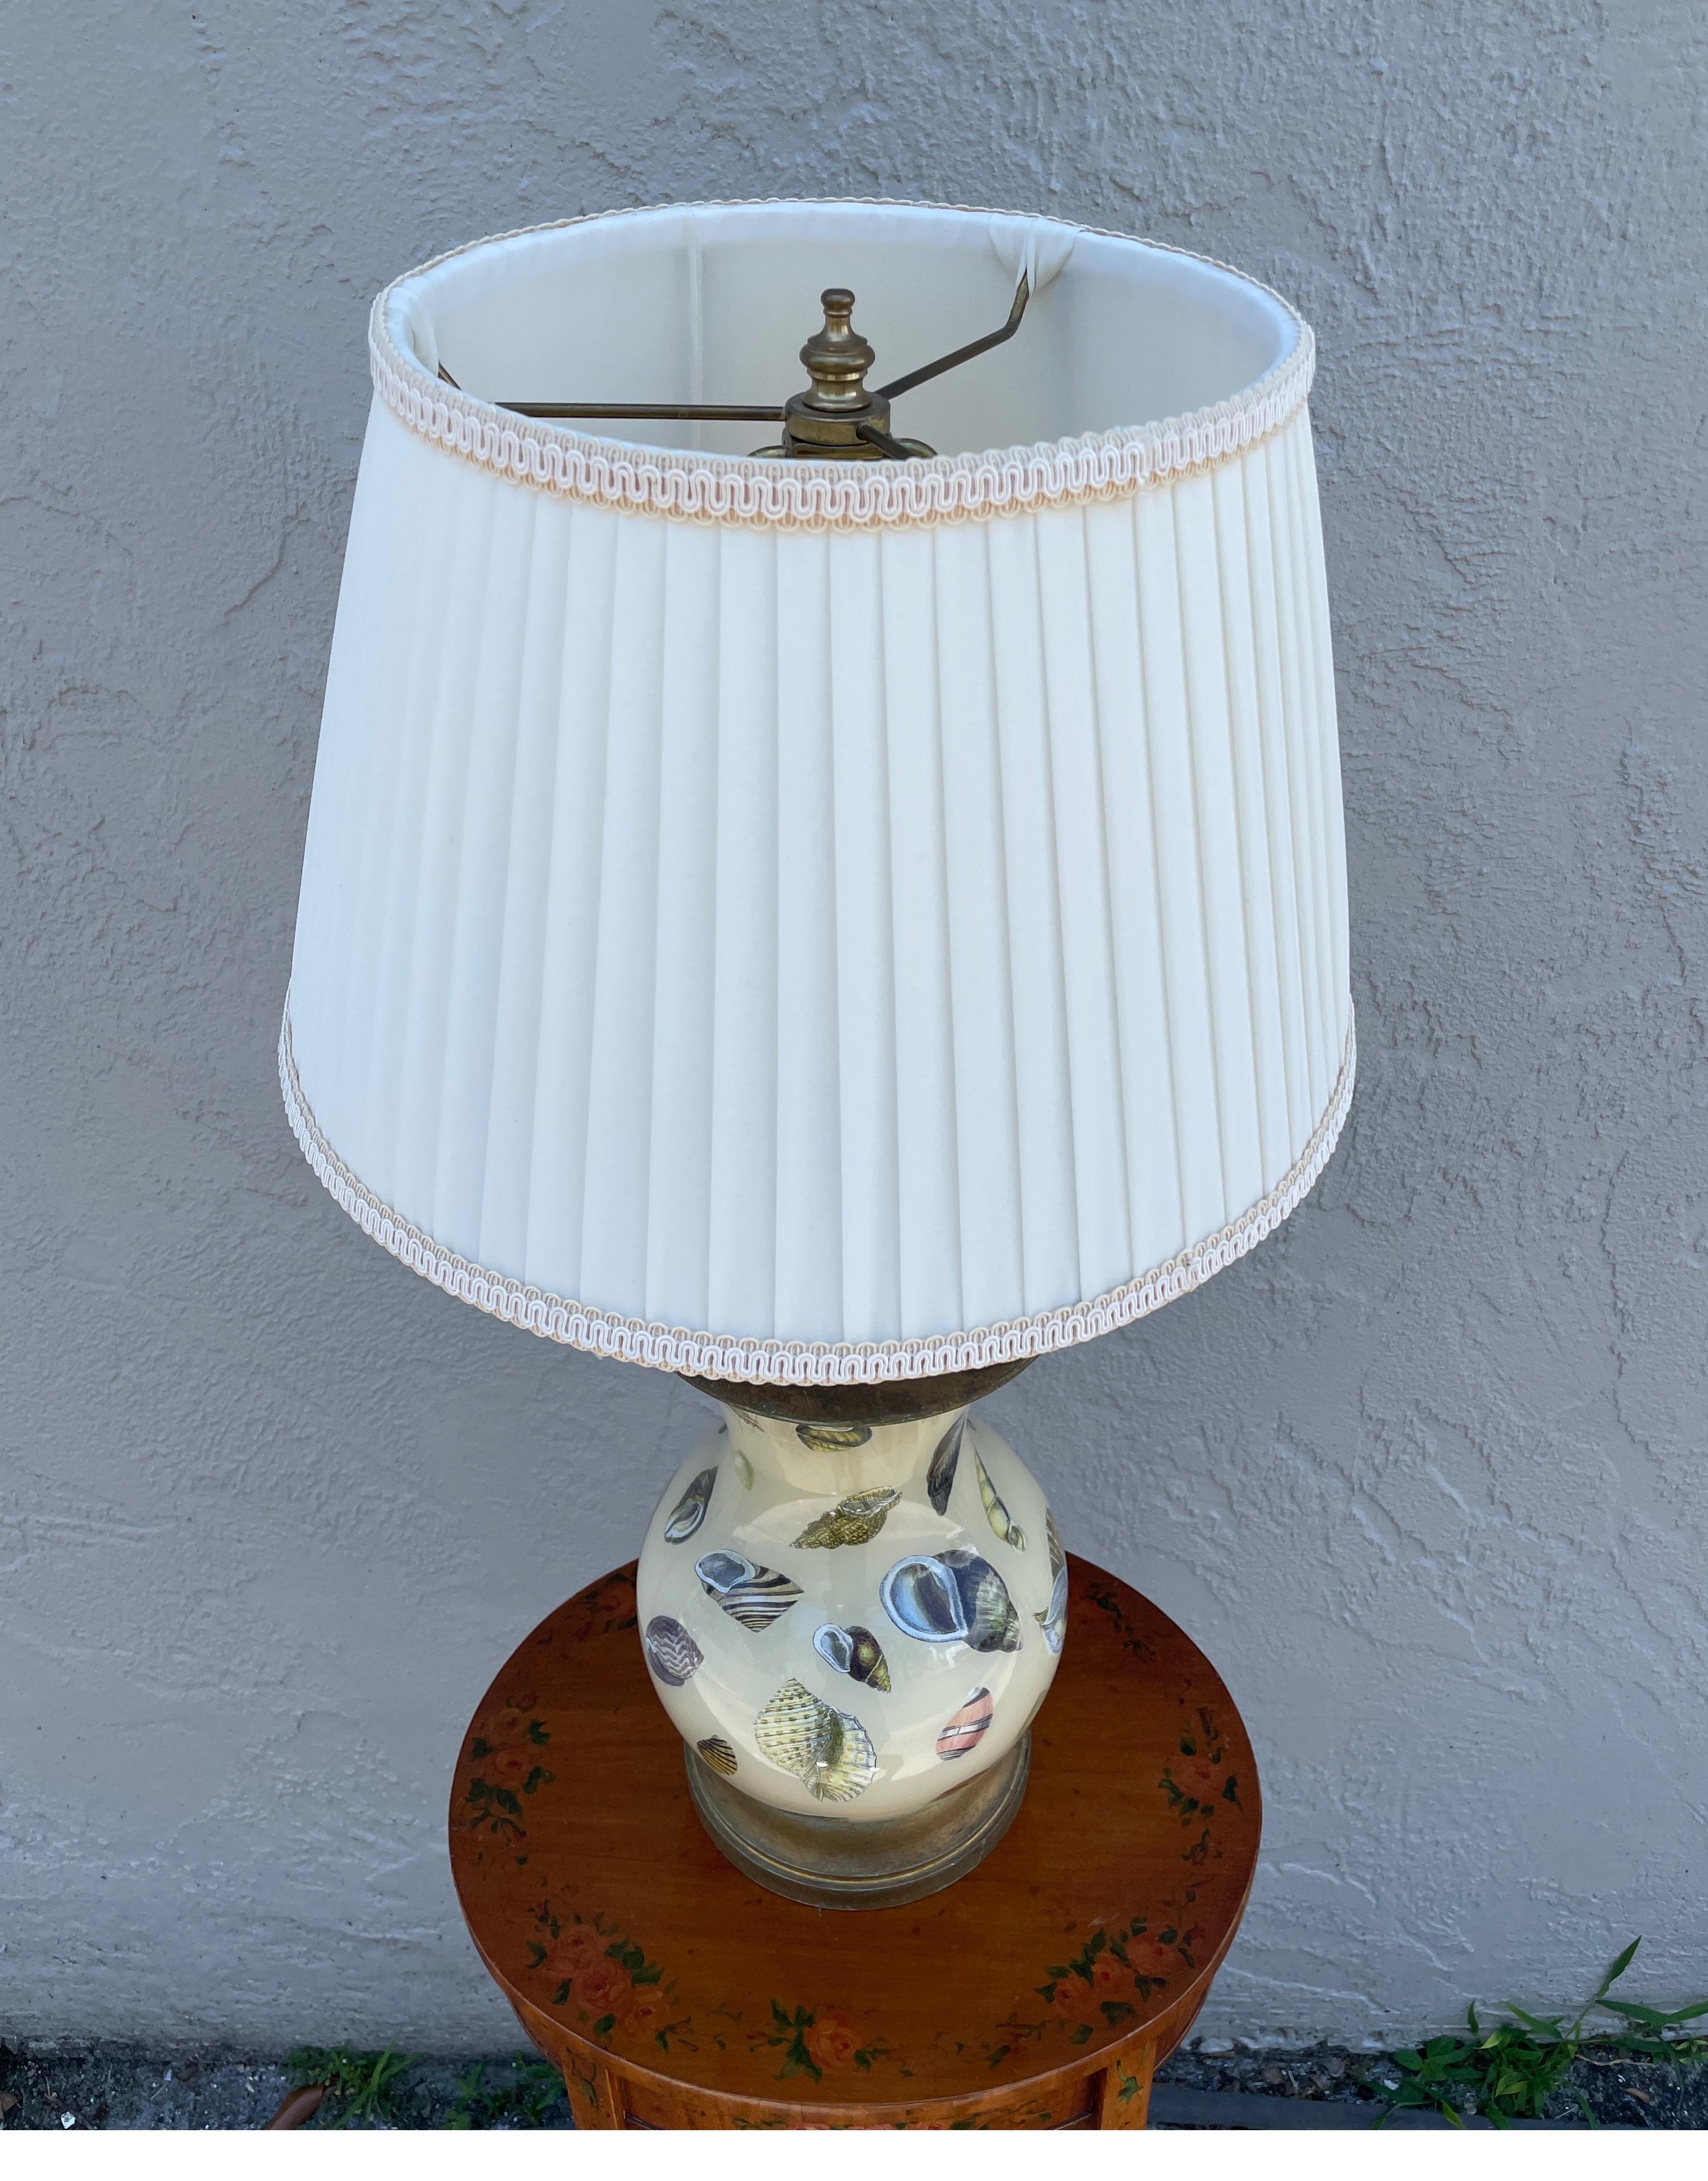 Vintage decoupage lamp with a variety of shell images on a cream colored background.